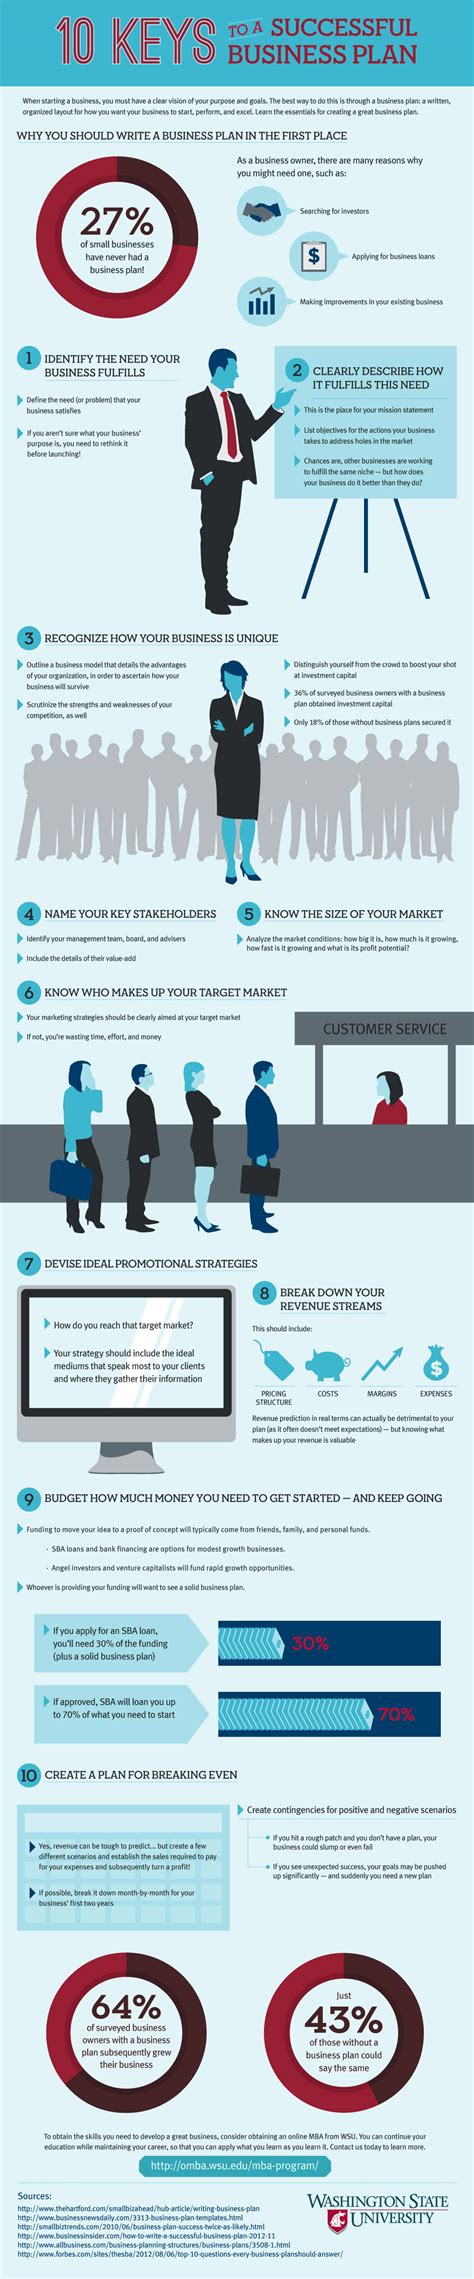 Building A Business Plan Infographic Money 101